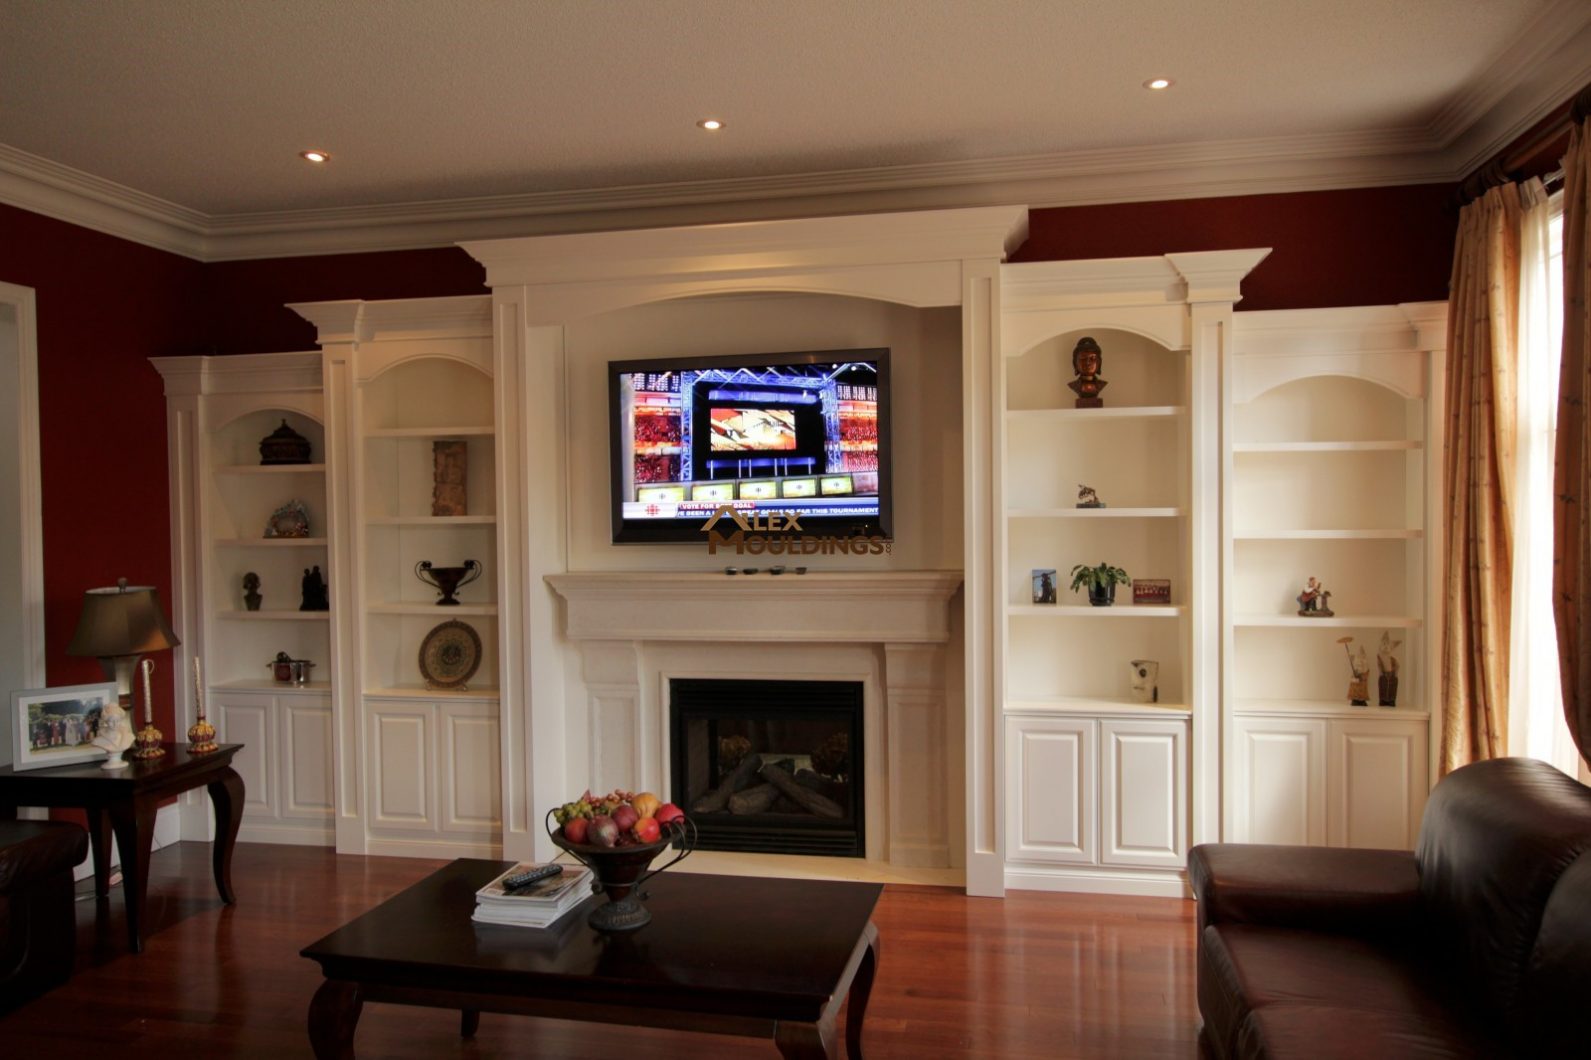 Kitchen Cabinets Wall Units Closets, Wall To Entertainment Center Bookcase And Fireplace Design